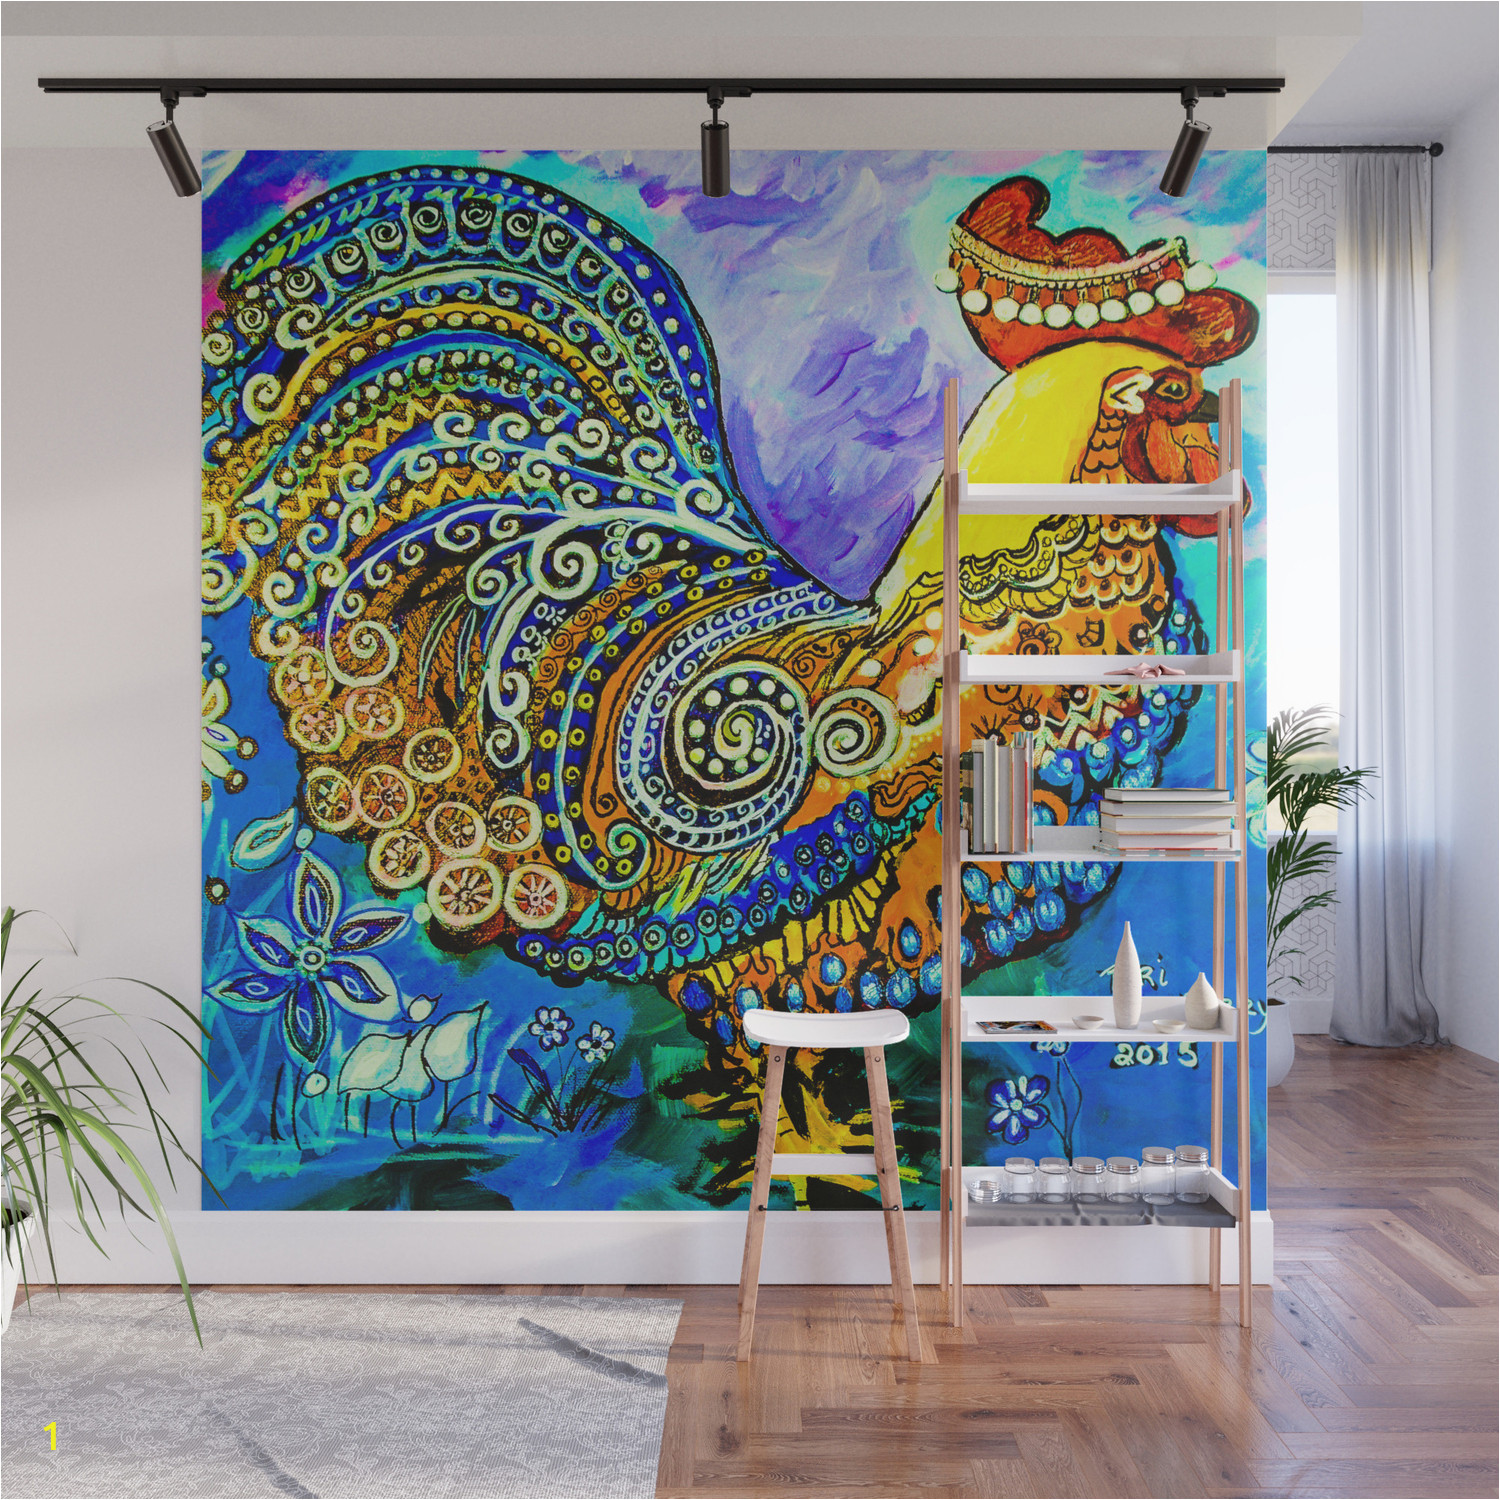 How to Paint A Wall Mural with Acrylics Crazy Chicken Wall Mural